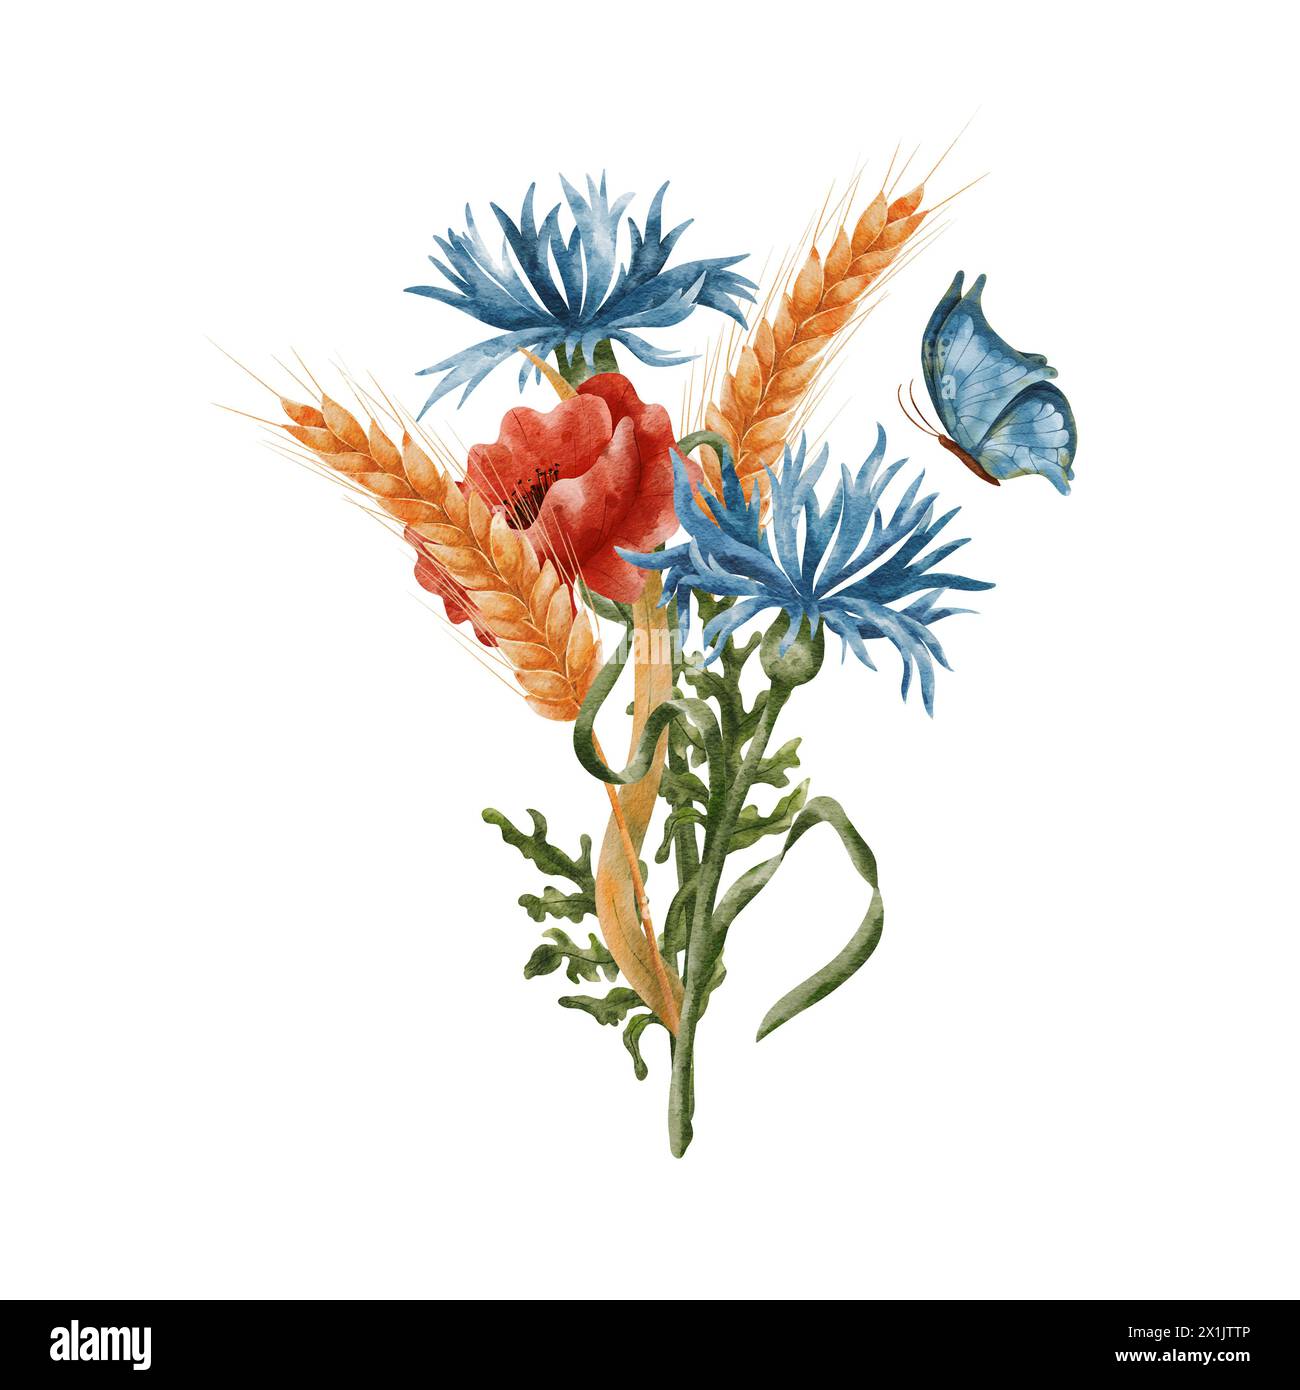 Ears of wheat and poppies, cornflowers and butterfly. A bouquet, a composition of ears of corn and field poppies, a blue butterfly. Wheat isolated on Stock Photo